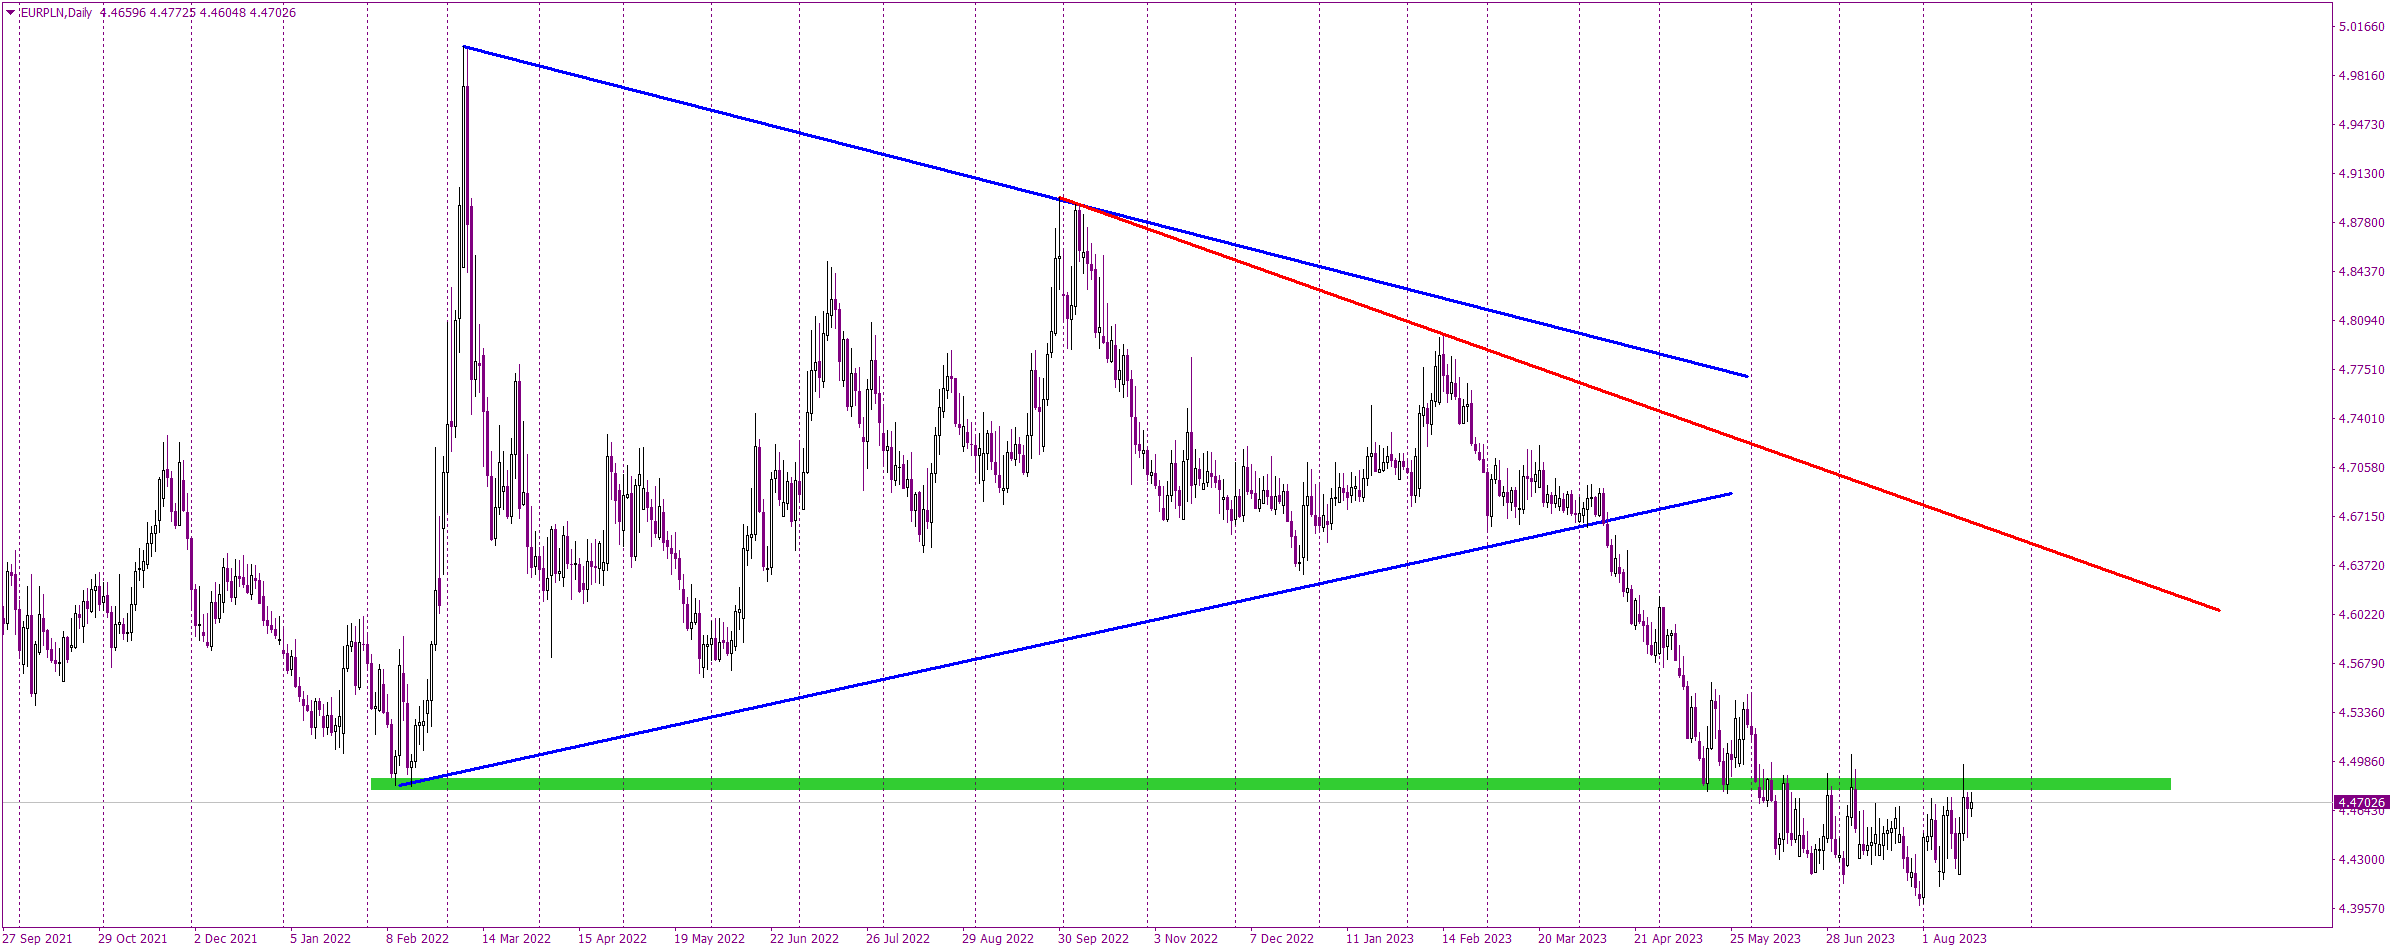 A Close Look at EURPLN’s Critical Juncture